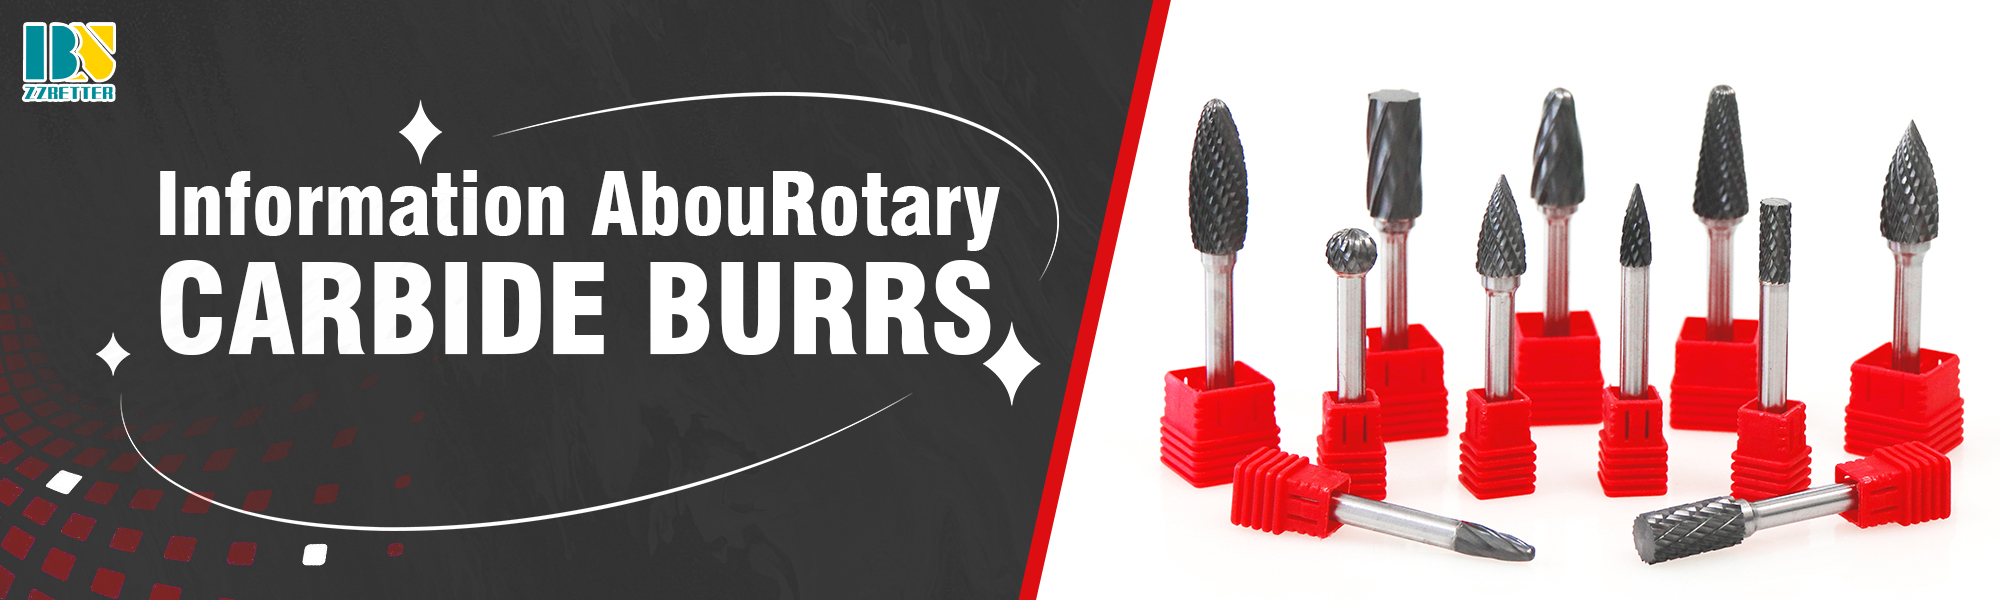 Information About Rotary Carbide Burrs